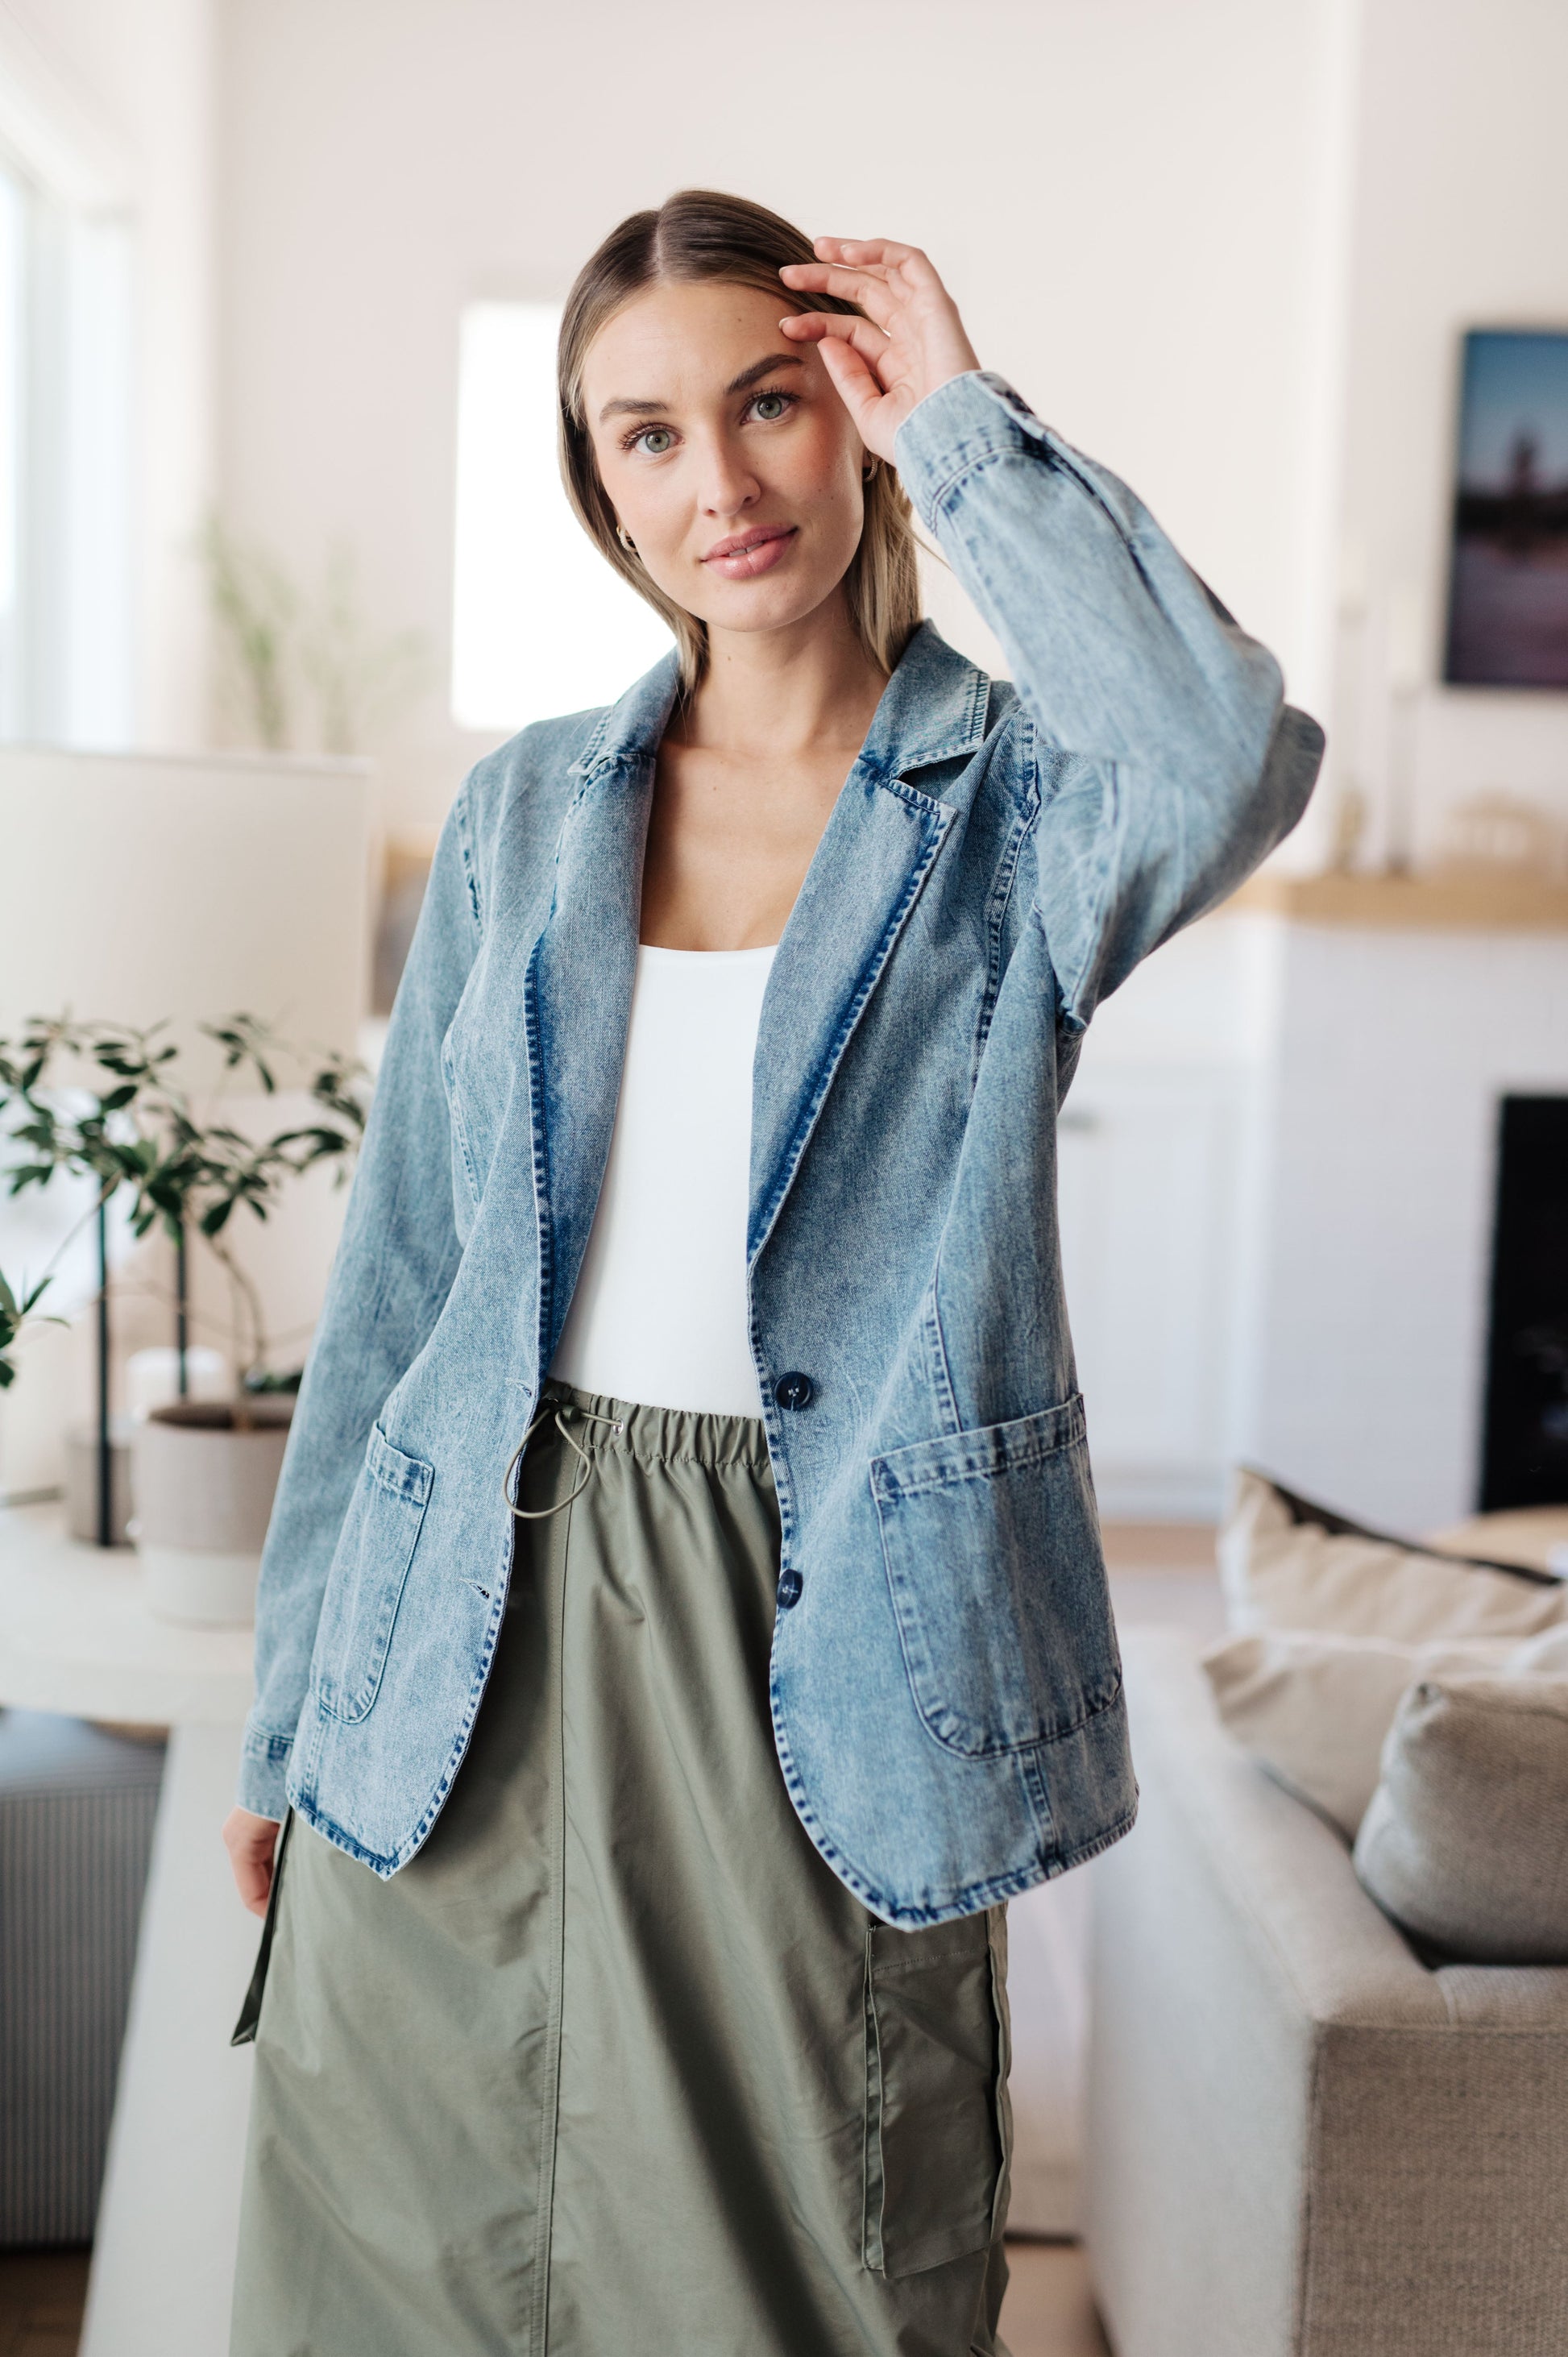 This Business Brunch Denim Blazer is the perfect combination of comfort and style! Crafted from lightweight denim, it features an acid wash and two-button closure, plus notched lapels and contour seaming for a tailored fit. Enjoy the contemporary look and feel with effortless chic! S - 3X